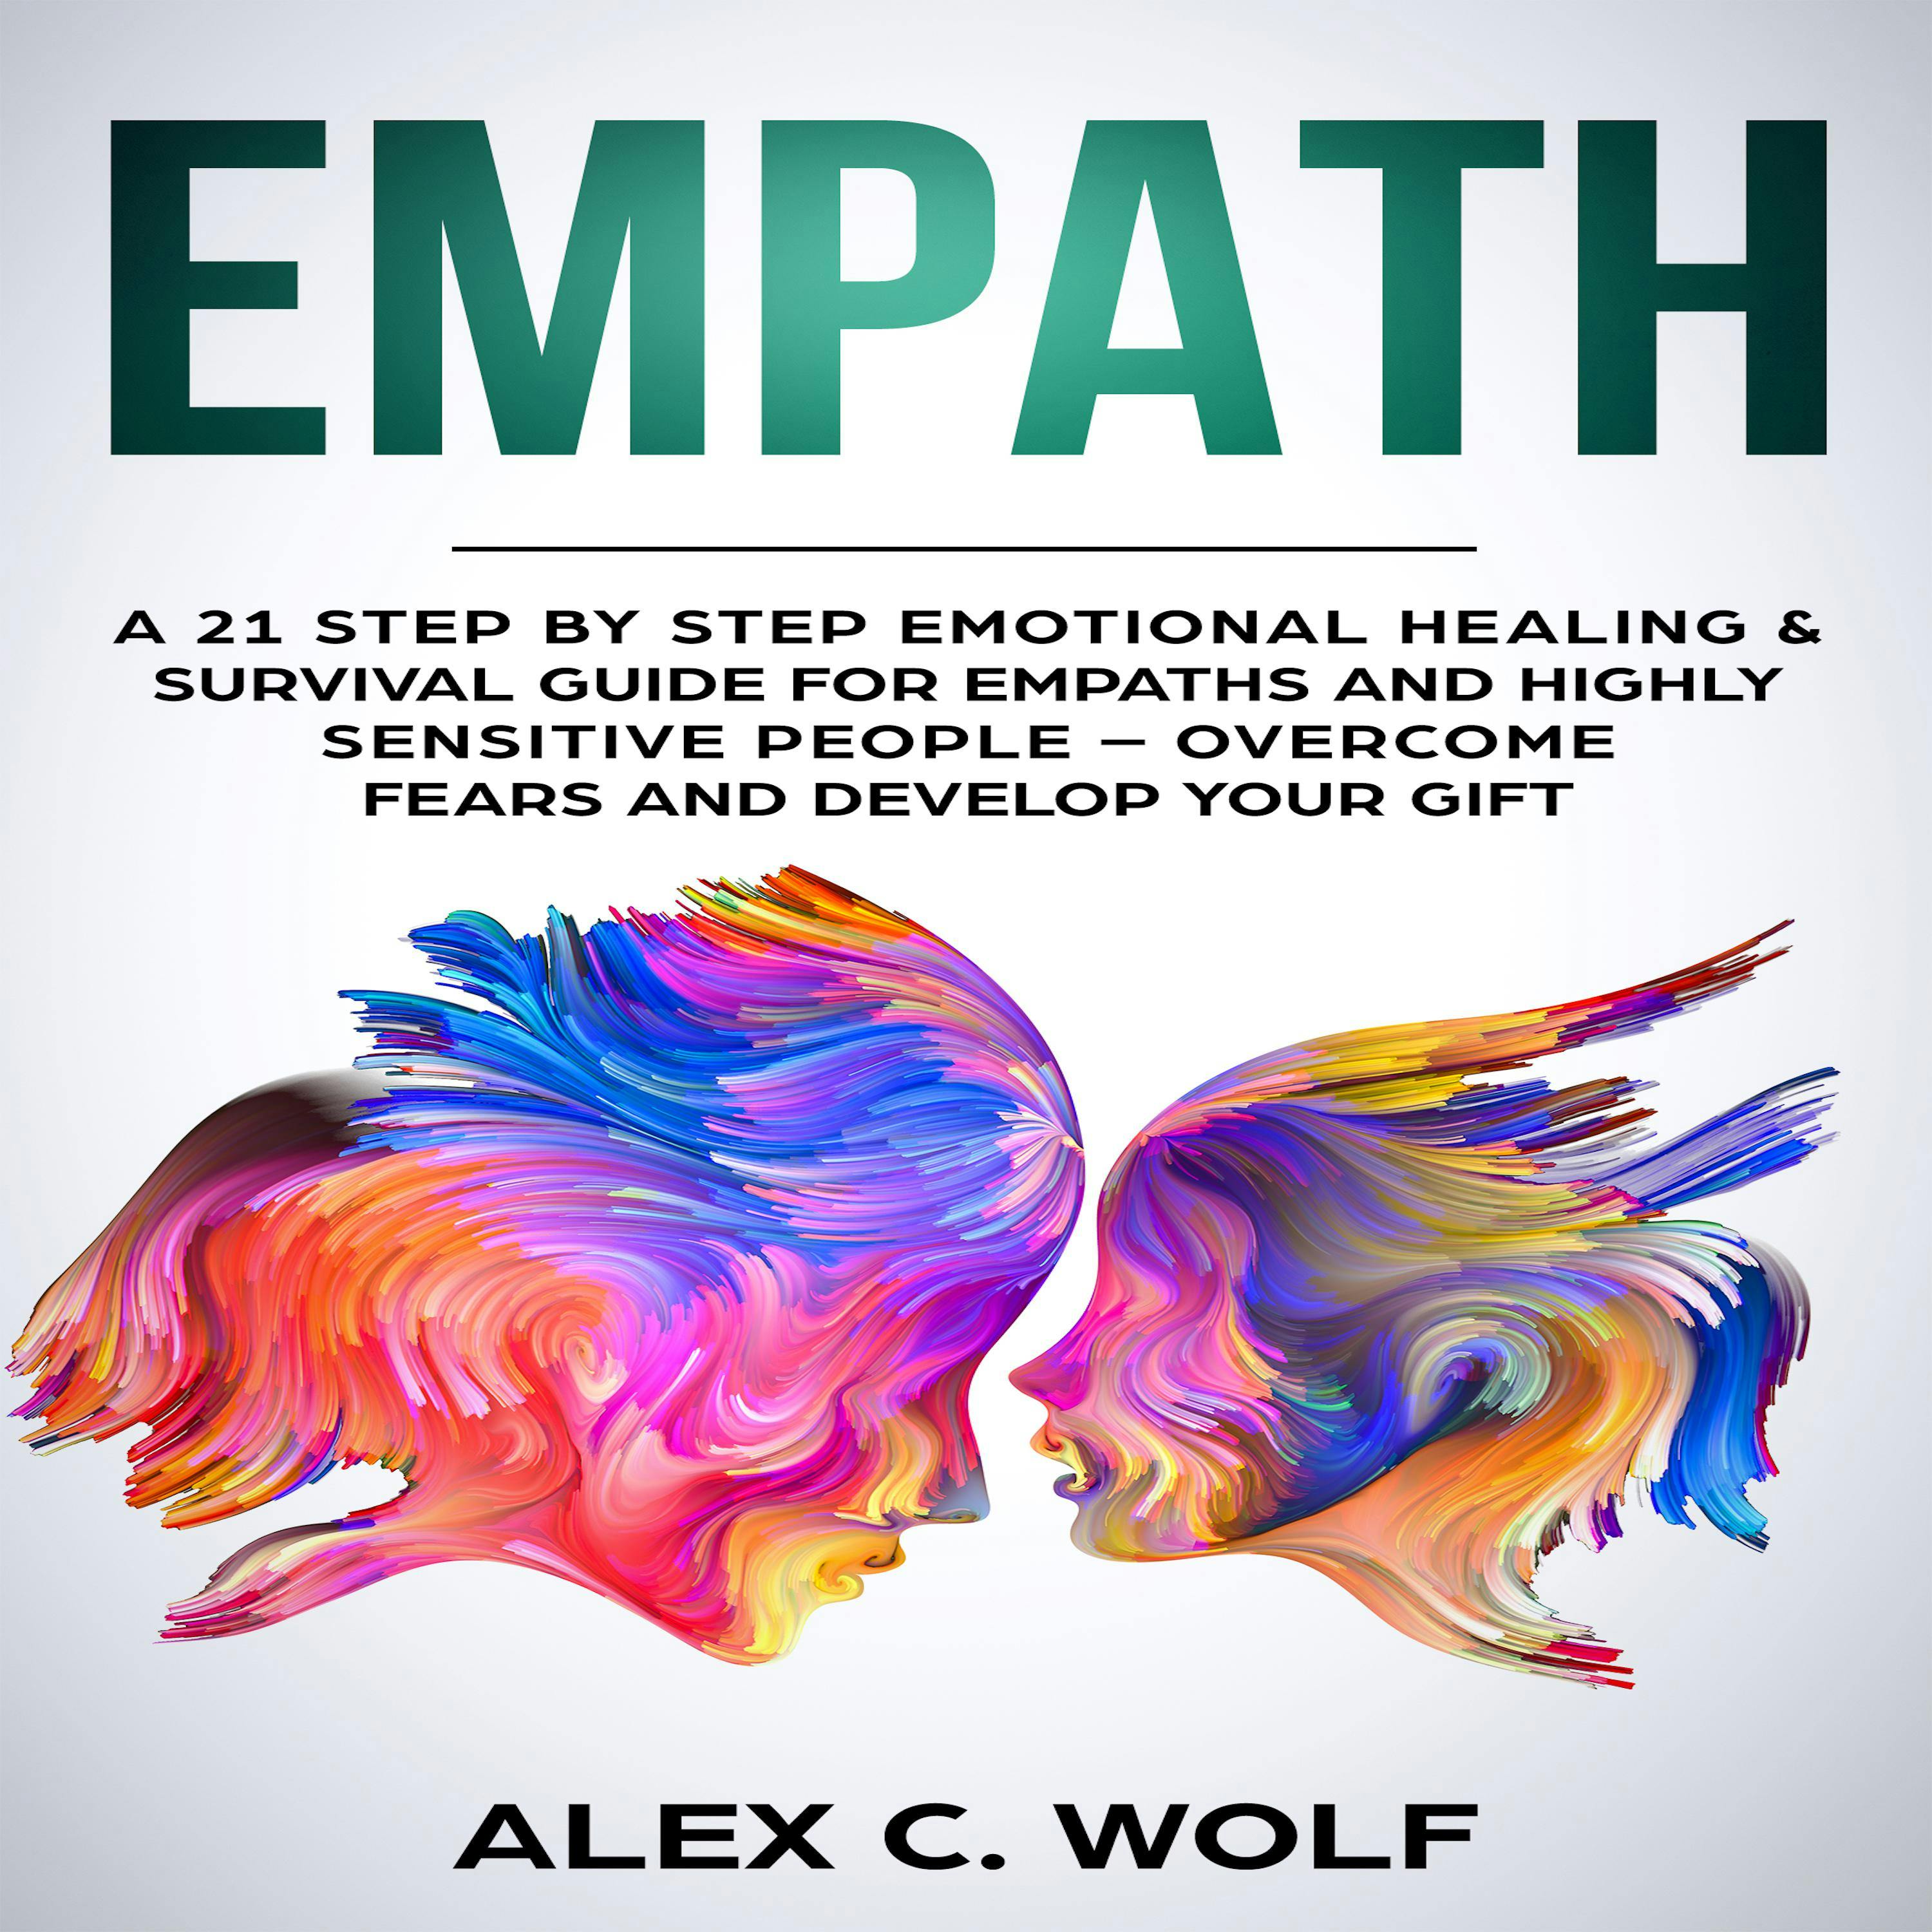 Empath: A 21 Step by Step Emotional Healing & Survival Guide for Empaths and Highly Sensitive People – Overcome Fears and Develop Your Gift - Alex C. Wolf